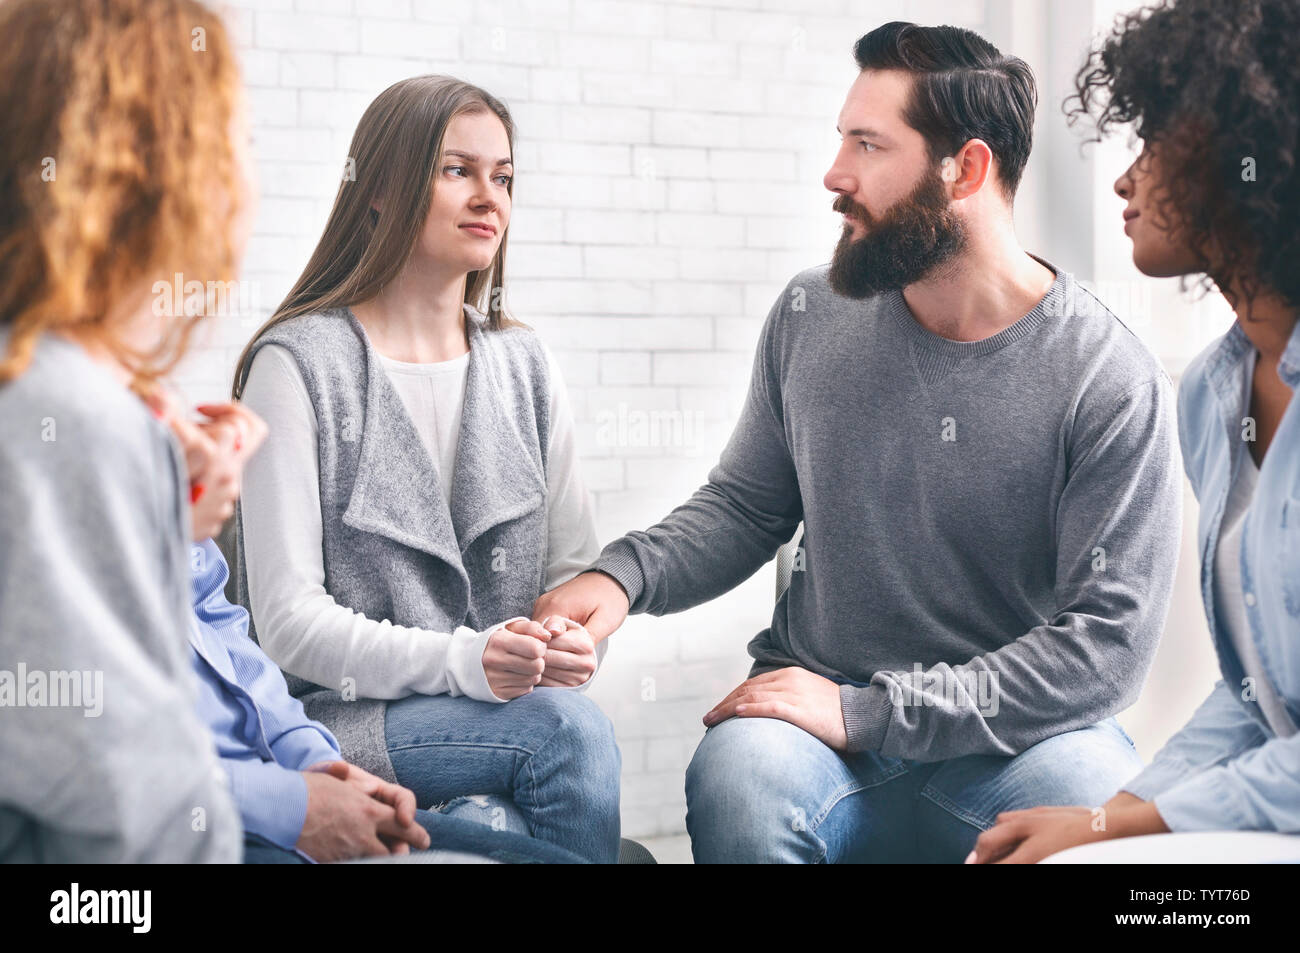 Depressed addicted woman sharing her problems at group meeting Stock Photo